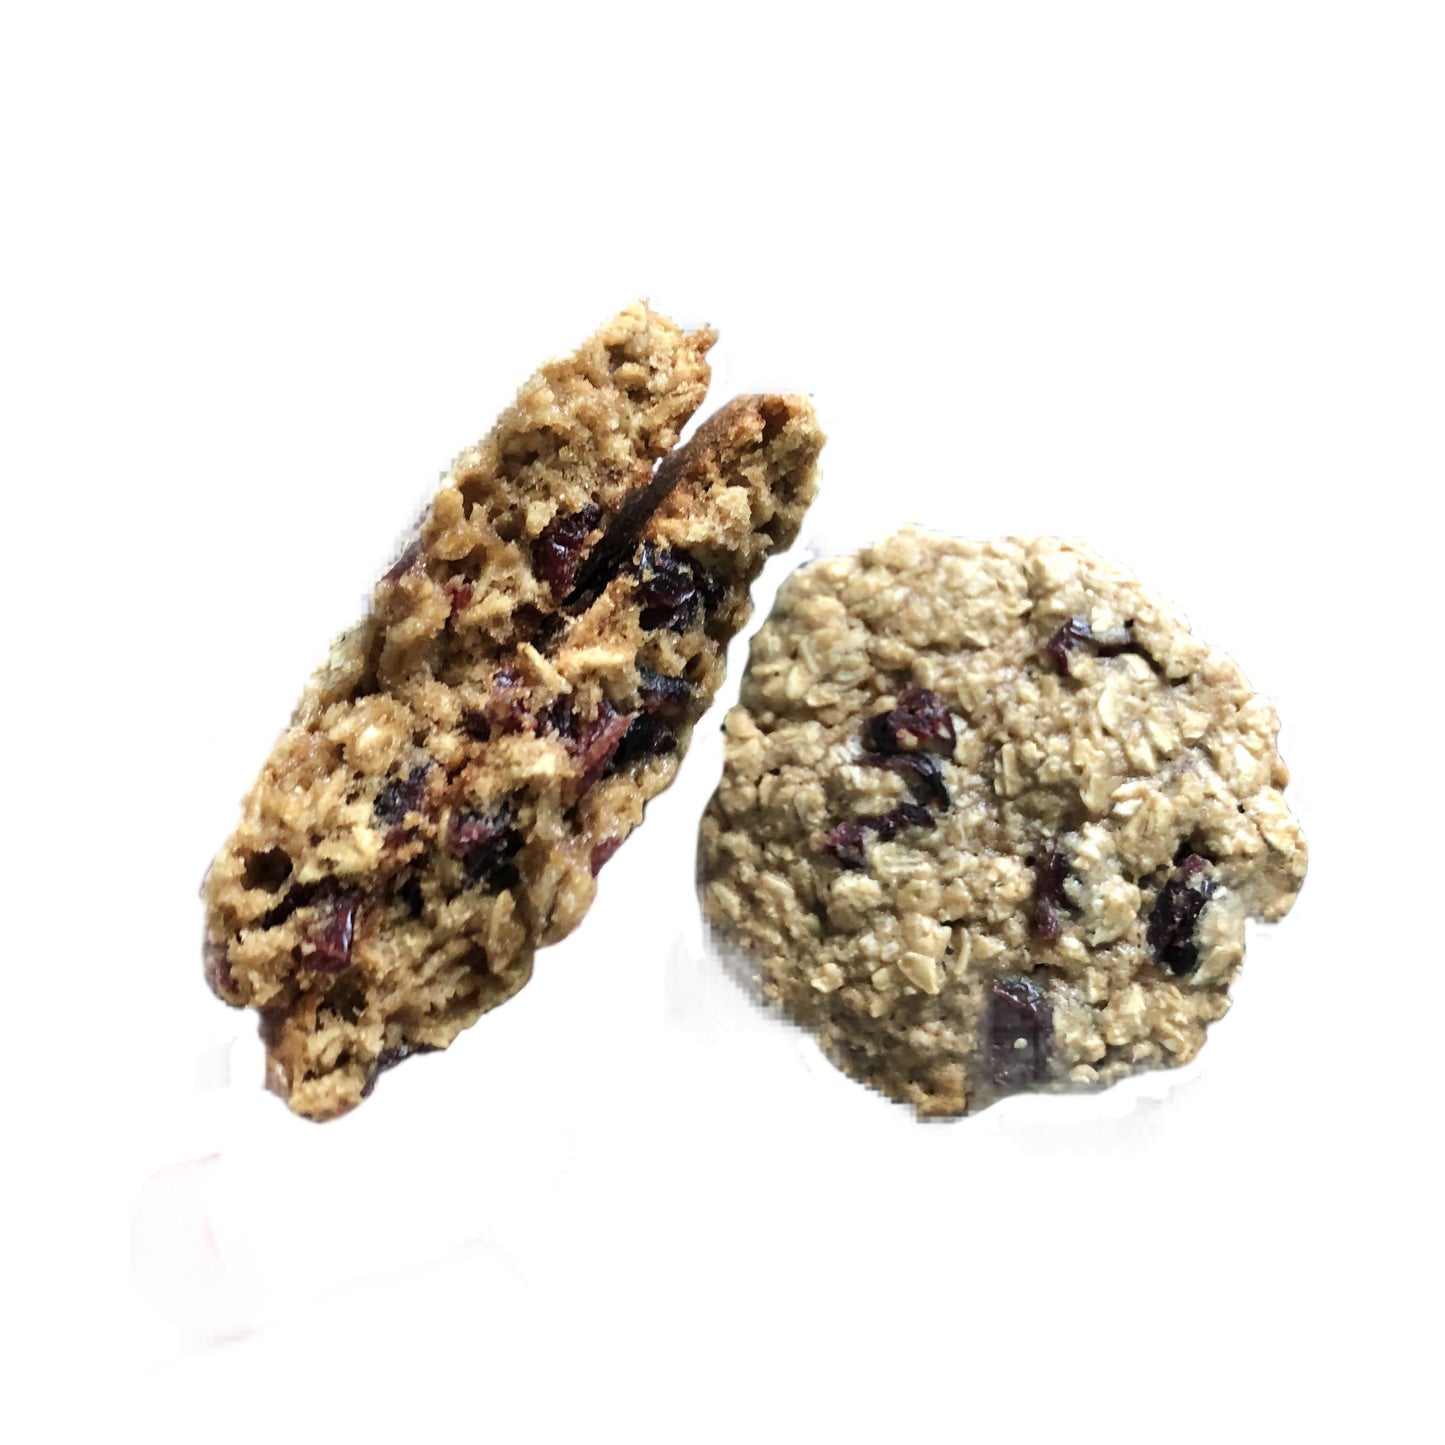 oatmeal cranberry cookies - 6 x 1 pc by farm2me